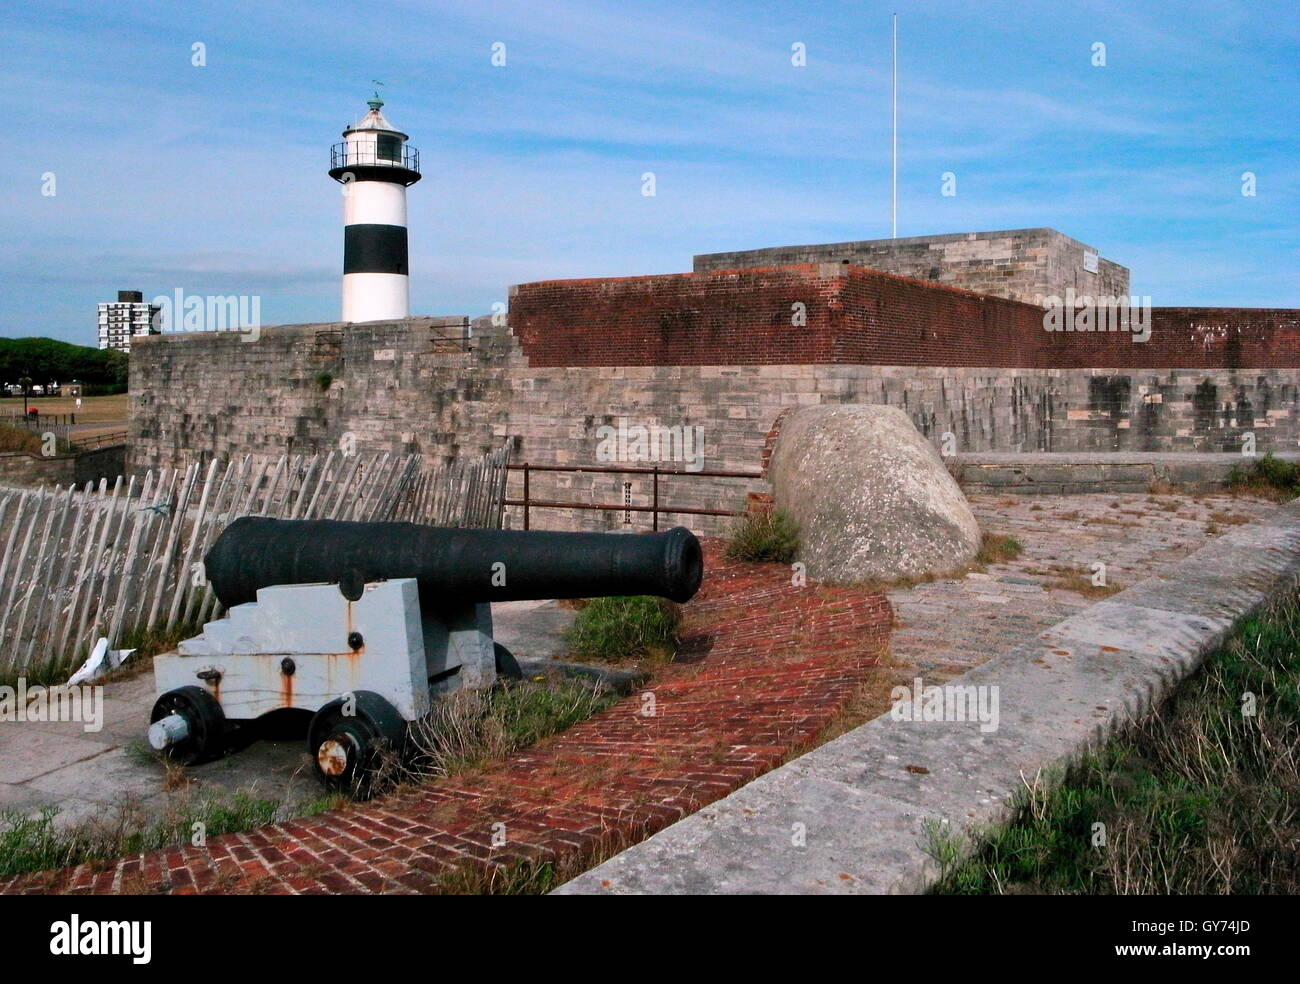 AJAXNETPHOTO. SOUTHSEA, ENGLAND. - SEAWARD DEFENCES - SOUTHSEA CASTLE AND LIGHTHOUSE LOOKING OUT OVER SPITHEAD BUILT IN THE REIGN OF HENRY VIII.  PHOTO:JONATHAN EASTLAND/AJAX  REF:GRX0310 12164 Stock Photo